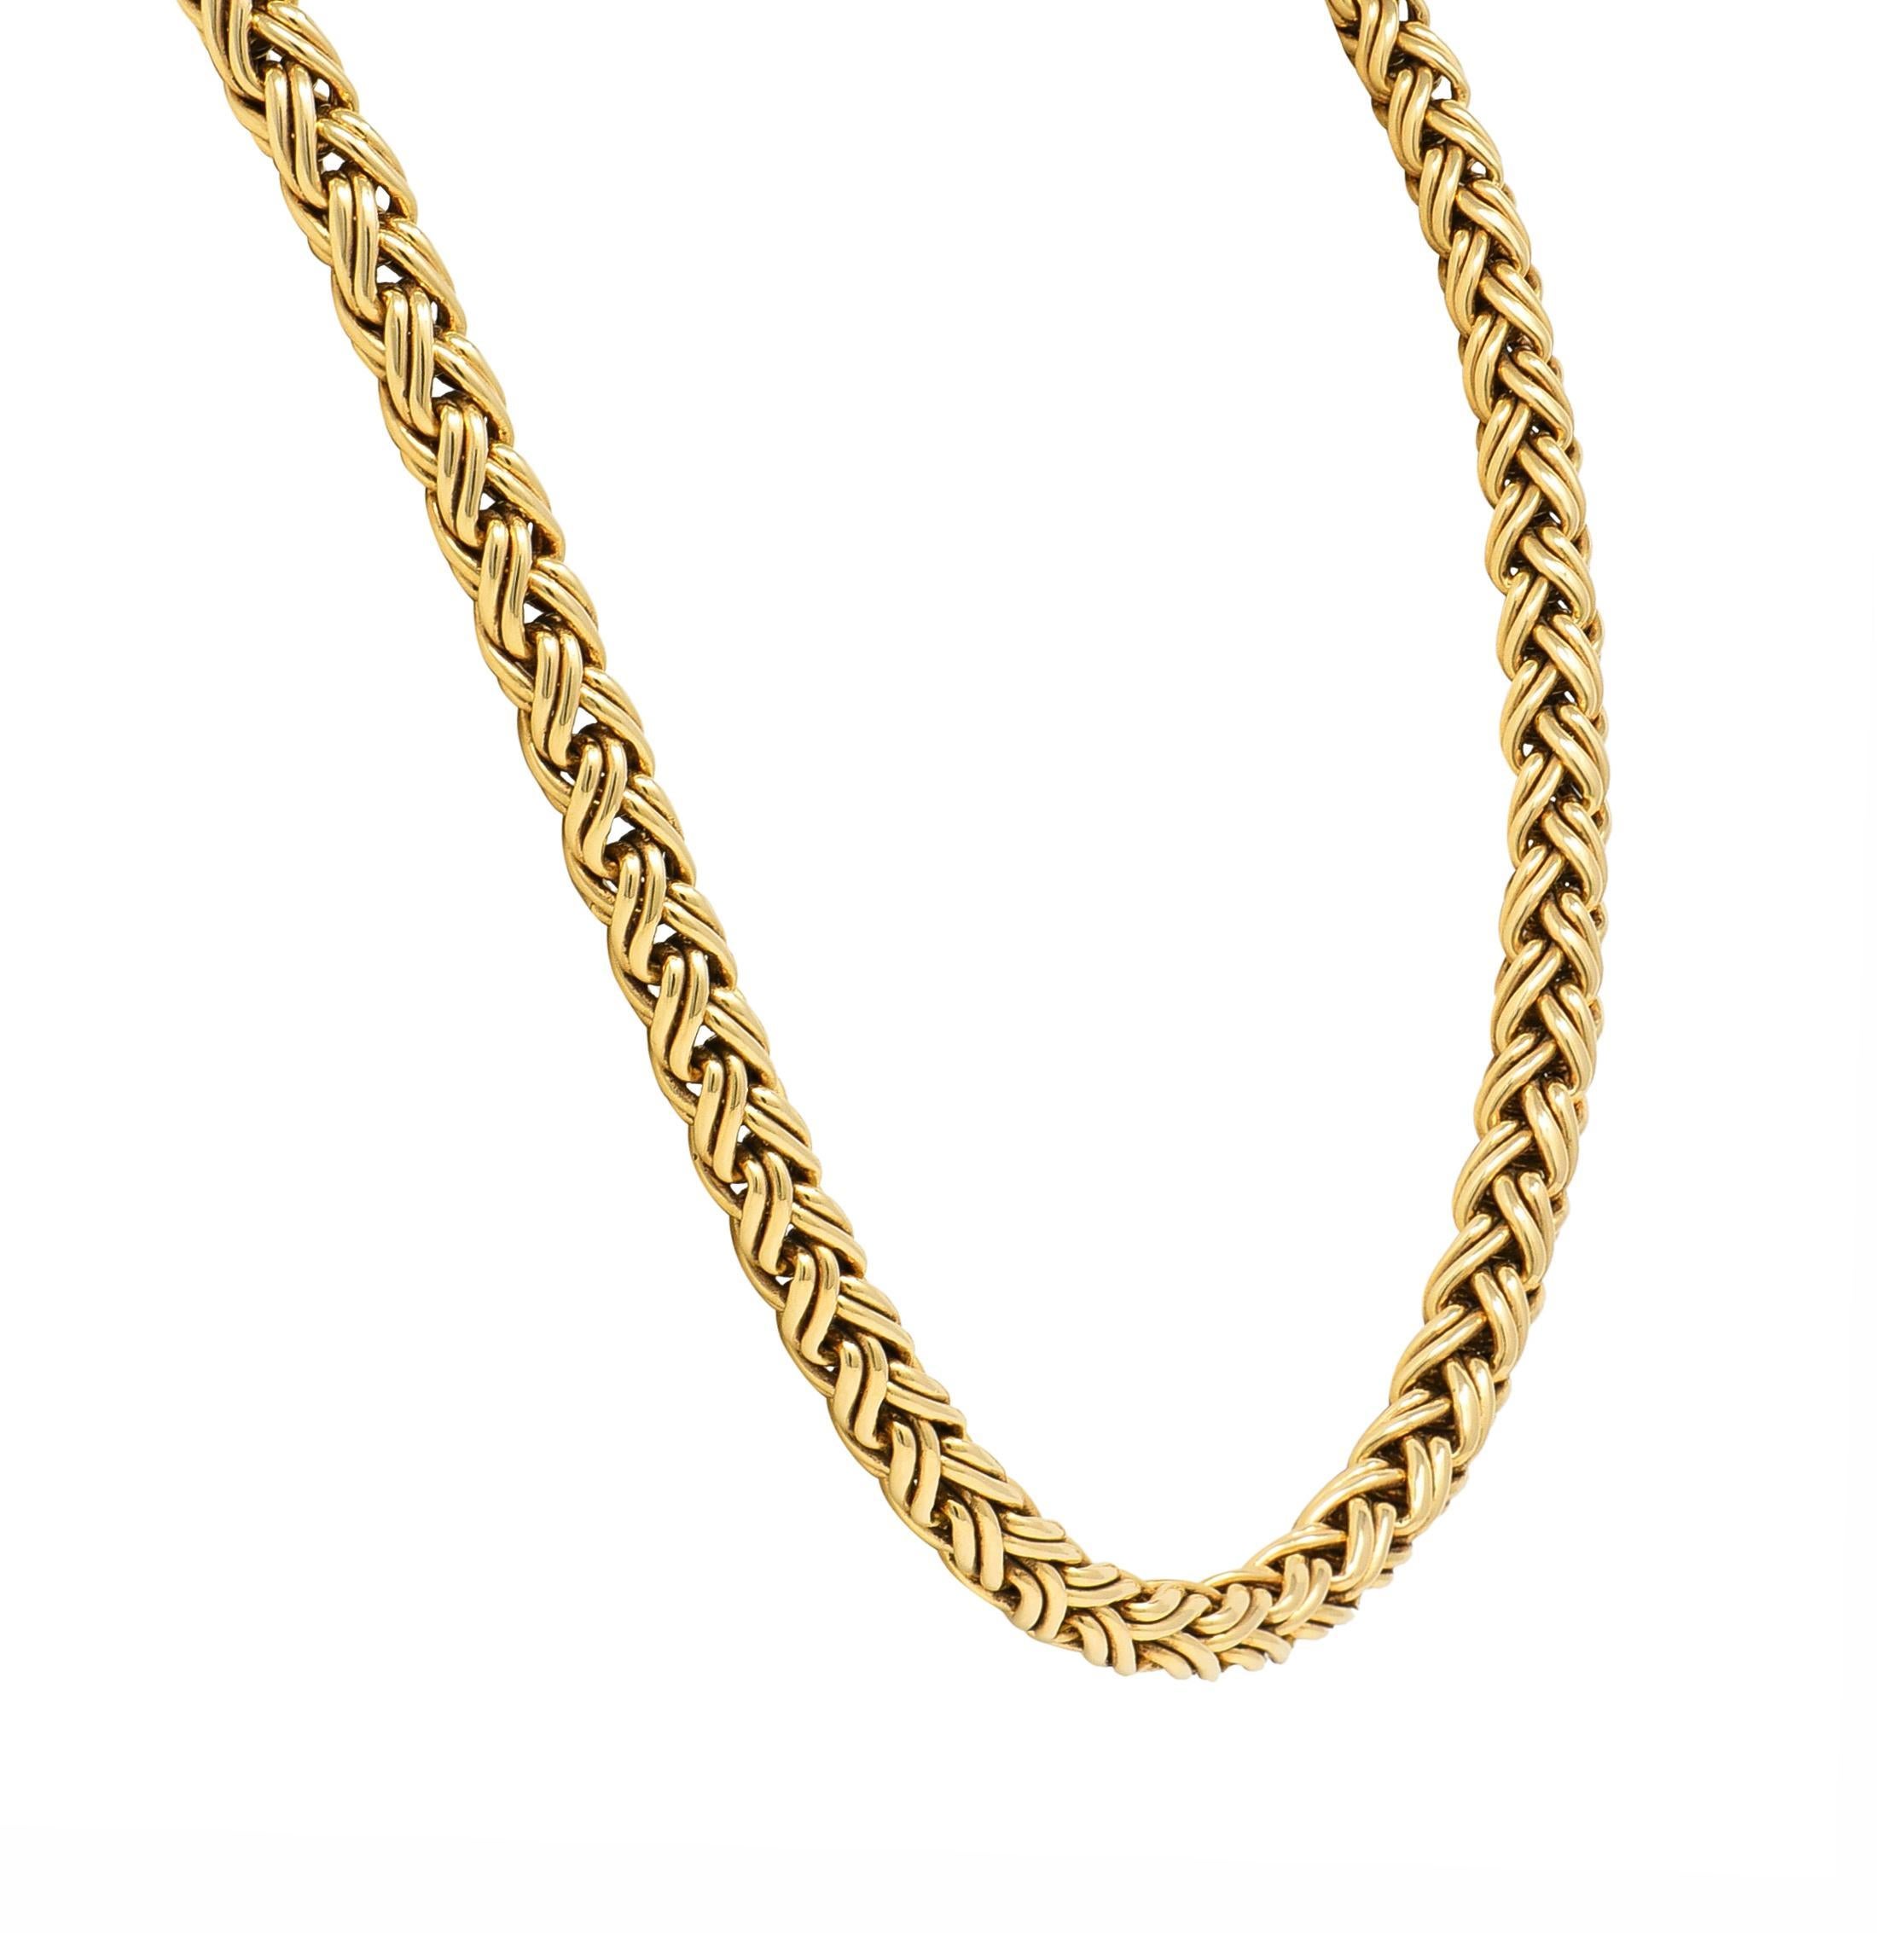 Women's or Men's Tiffany & Co. 1990's 14 Karat Yellow Gold Russian Weave Vintage Chain Necklace